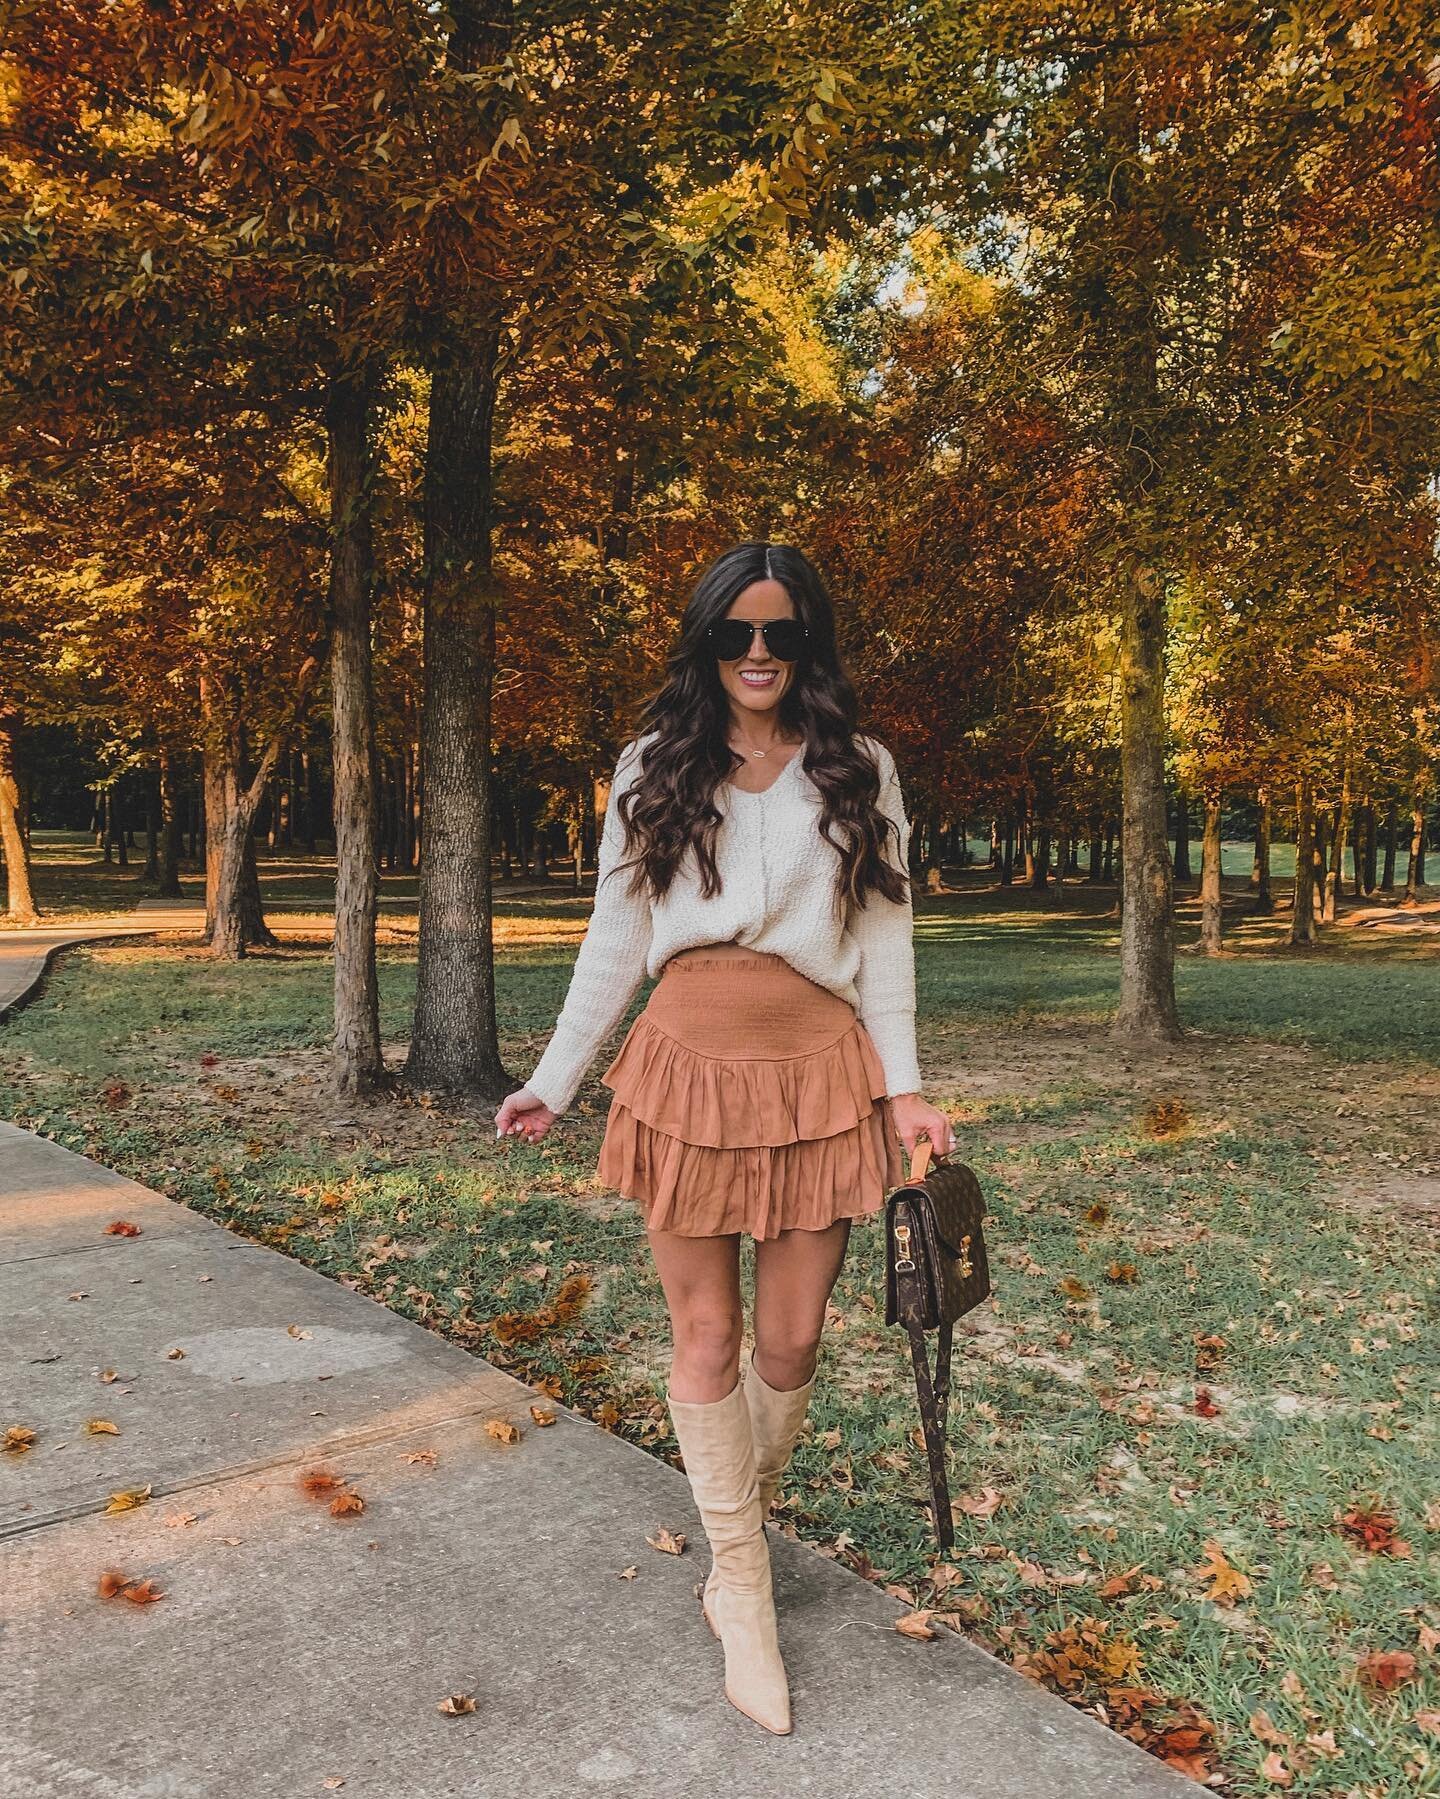 Can&rsquo;t beleaf it&rsquo;s already October🍁🍂 This year is flying! My skirt is from @tarahsuttonboutique &amp; 20% off with code FULLWOOD20 (built-in shorts🙌🏻). Hope you&rsquo;ve had a great Saturday! #fallstyle #shopsmall #fallvibes